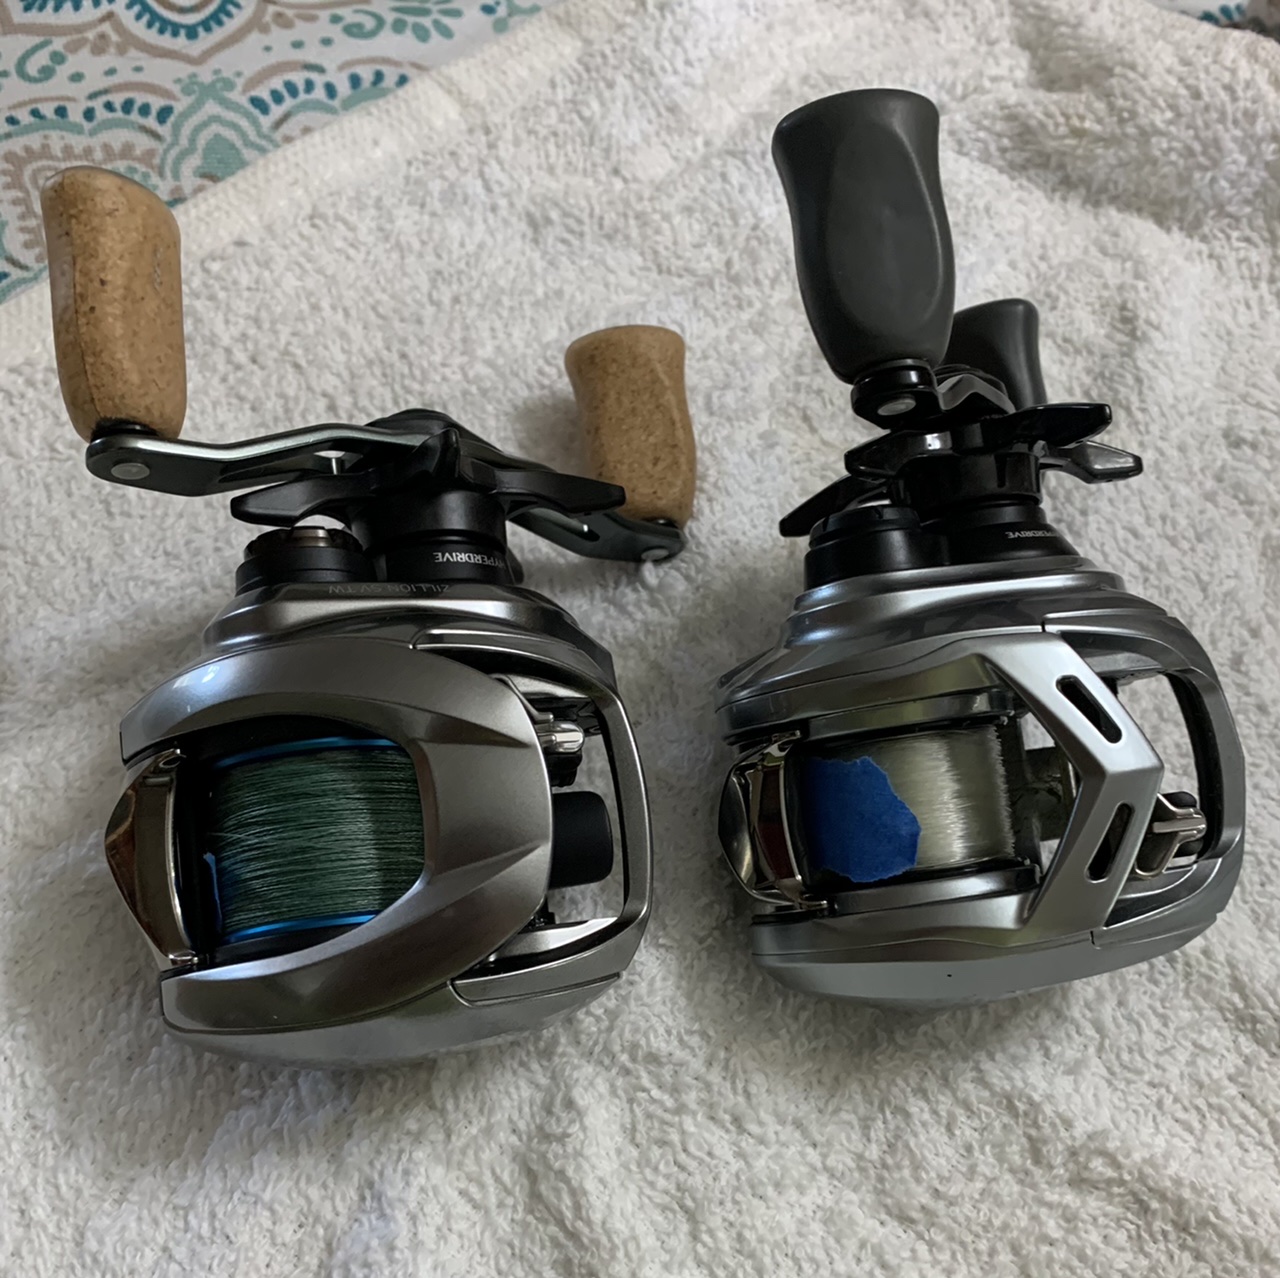 Does anyone have experience with the Daiwa Zillion SV TWS. Do you like it?  Why? What do you use it for? How do you think it compares to other reels in  the